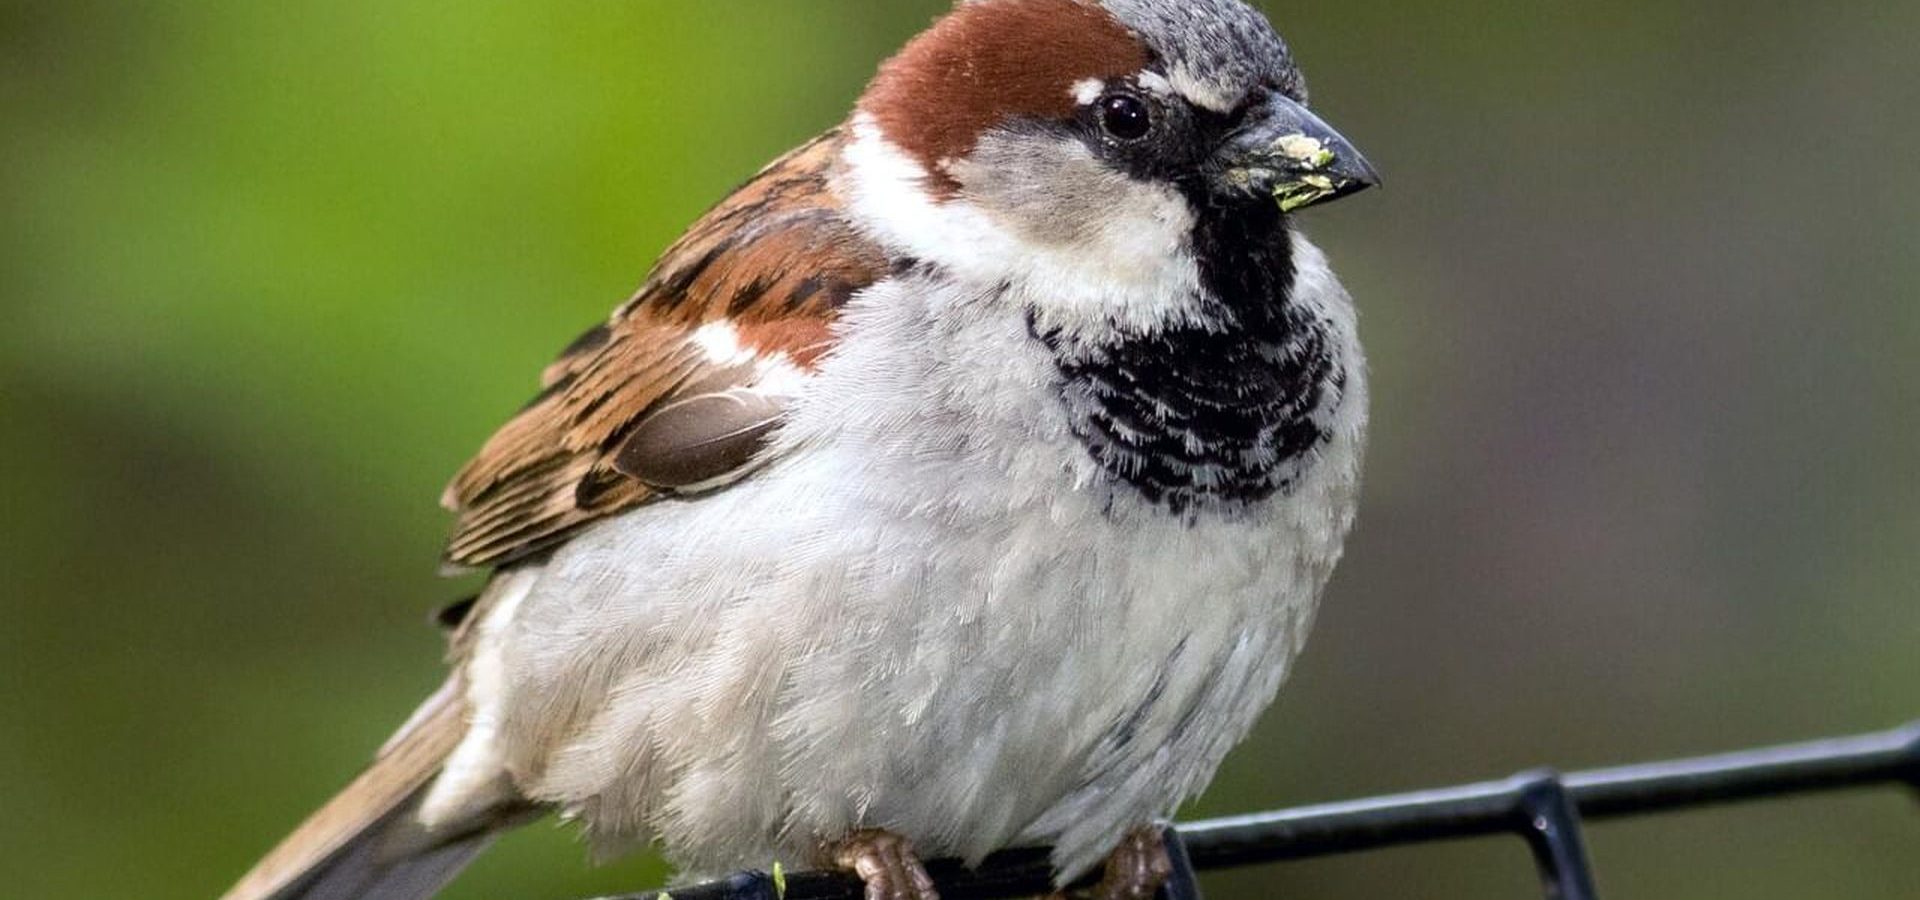 House Sparrow Identification, All About Birds, Cornell Lab of Ornithology